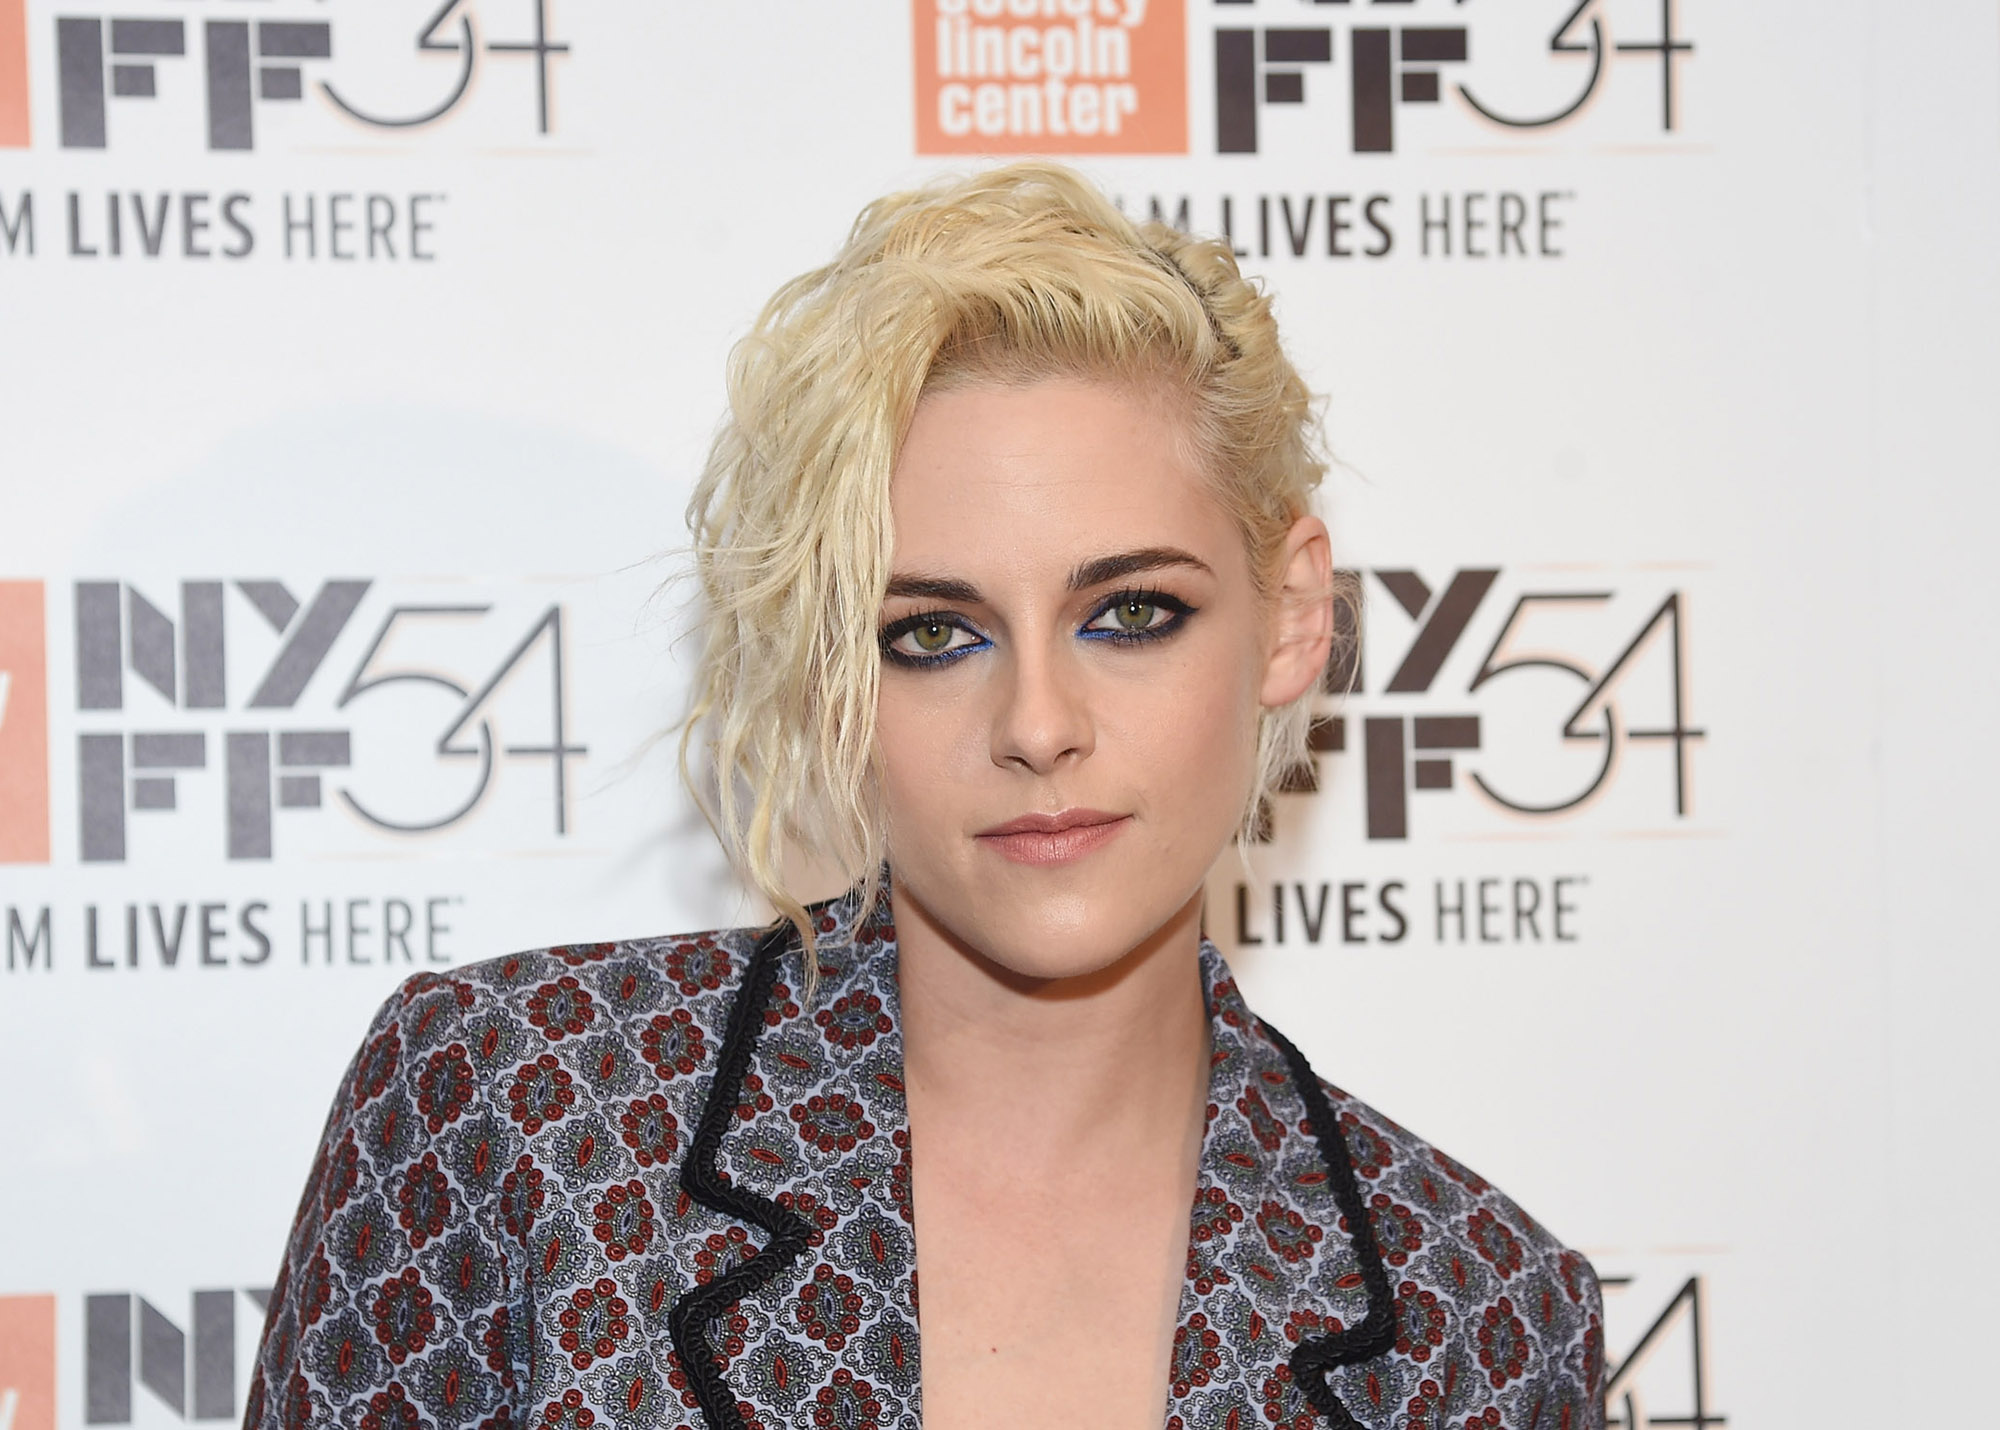 Kristen Stewart attends "An Evening with Kristen Stewart" during the 54th New York Film Festival at Stanley H. Kaplan Penthouse at Lincoln Center on October 5, 2016 in New York City.  (Photo by Jamie McCarthy/Getty Images) (Jamie McCarthy&mdash;Getty Images)